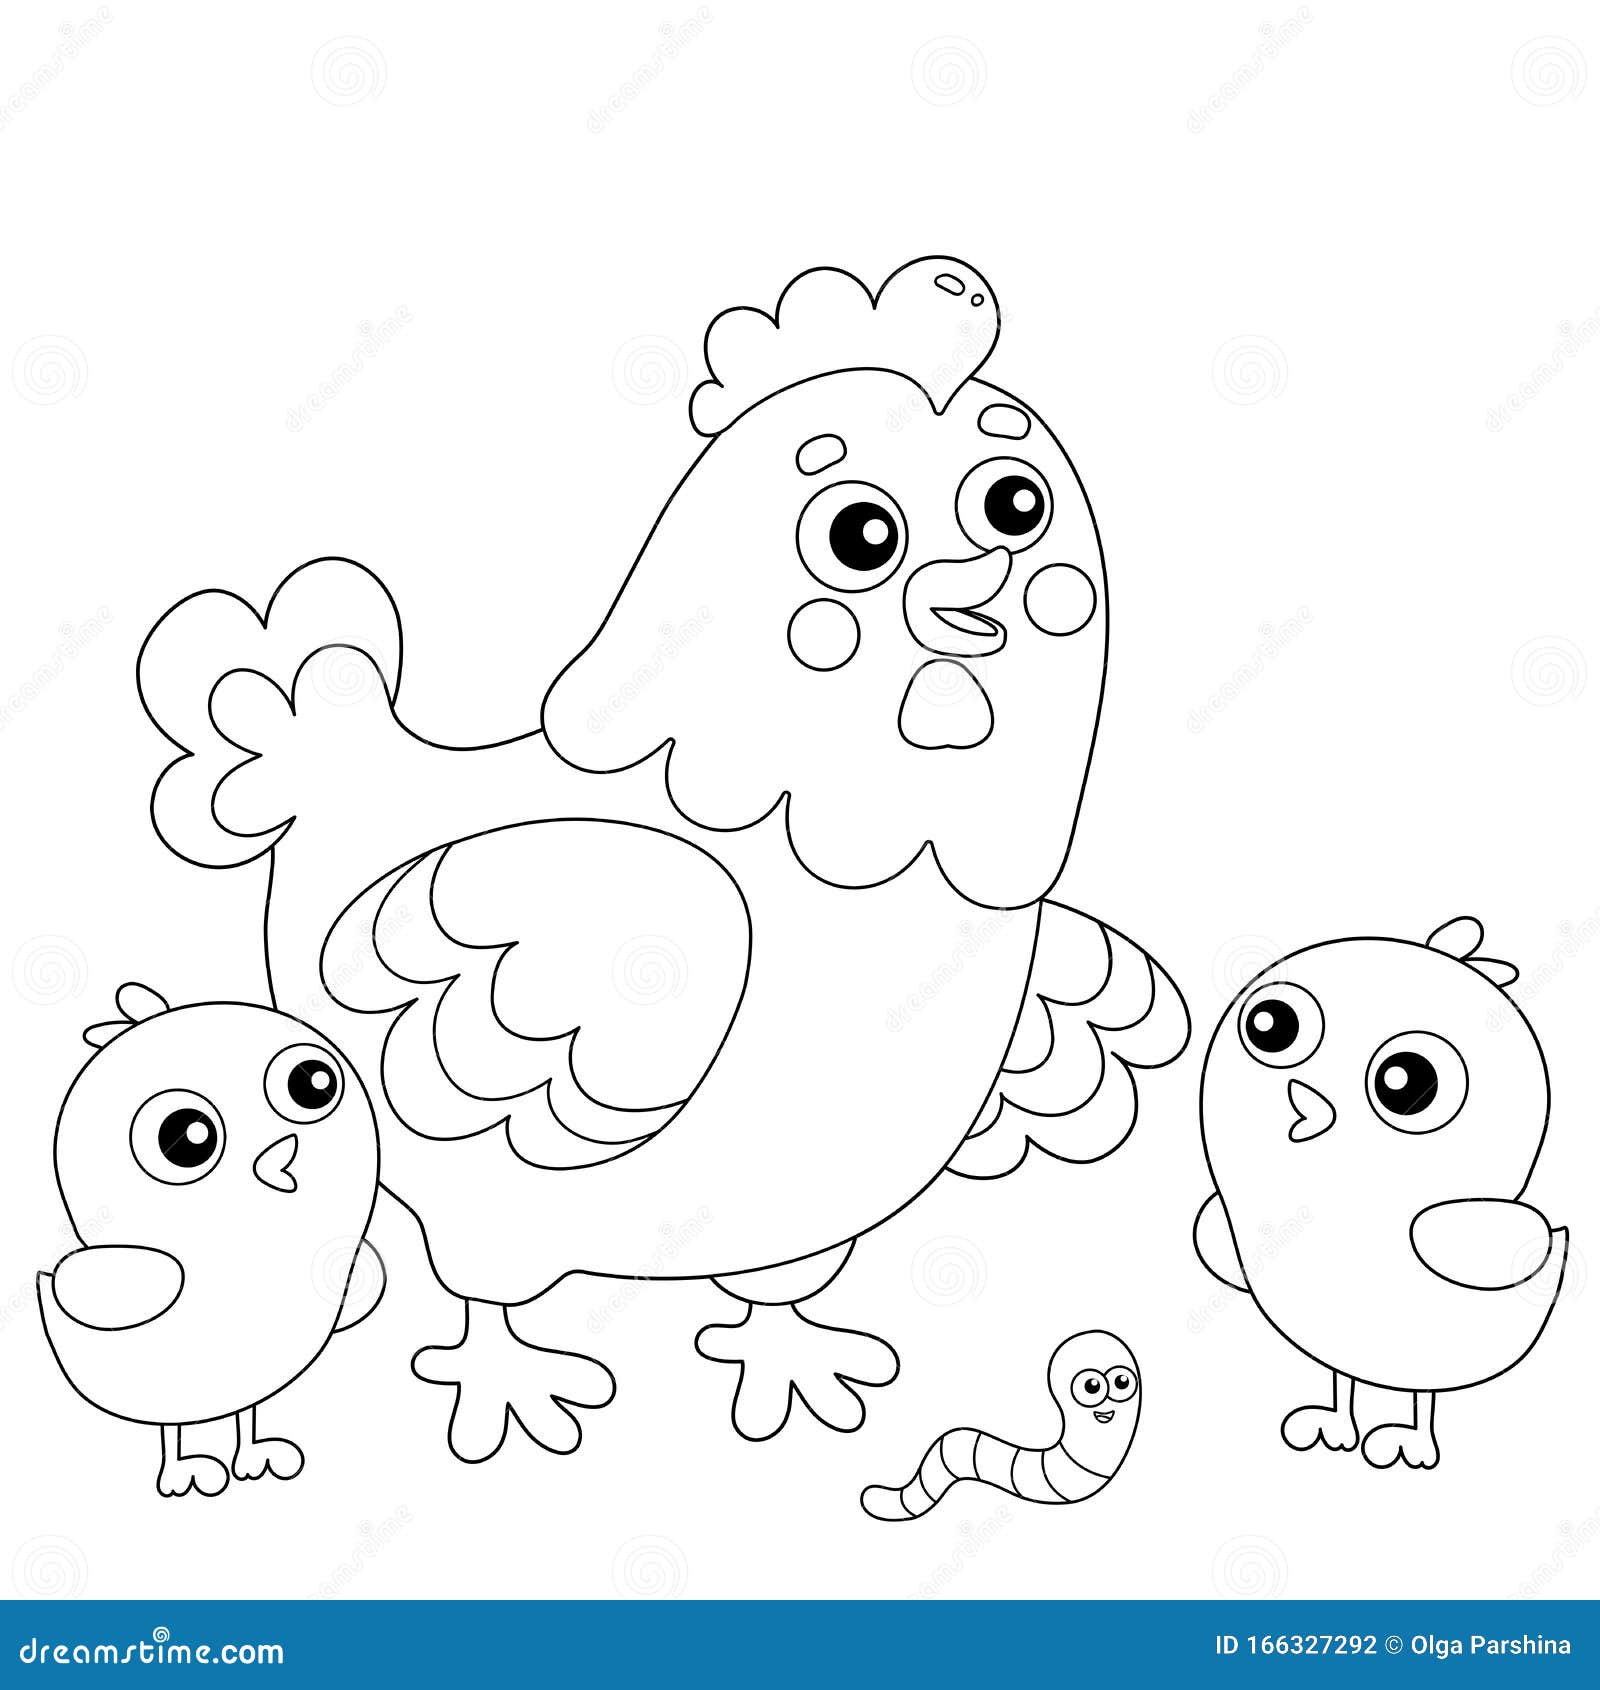 Coloring page outline of cartoon chicken or hen with chicks farm animals stock vector